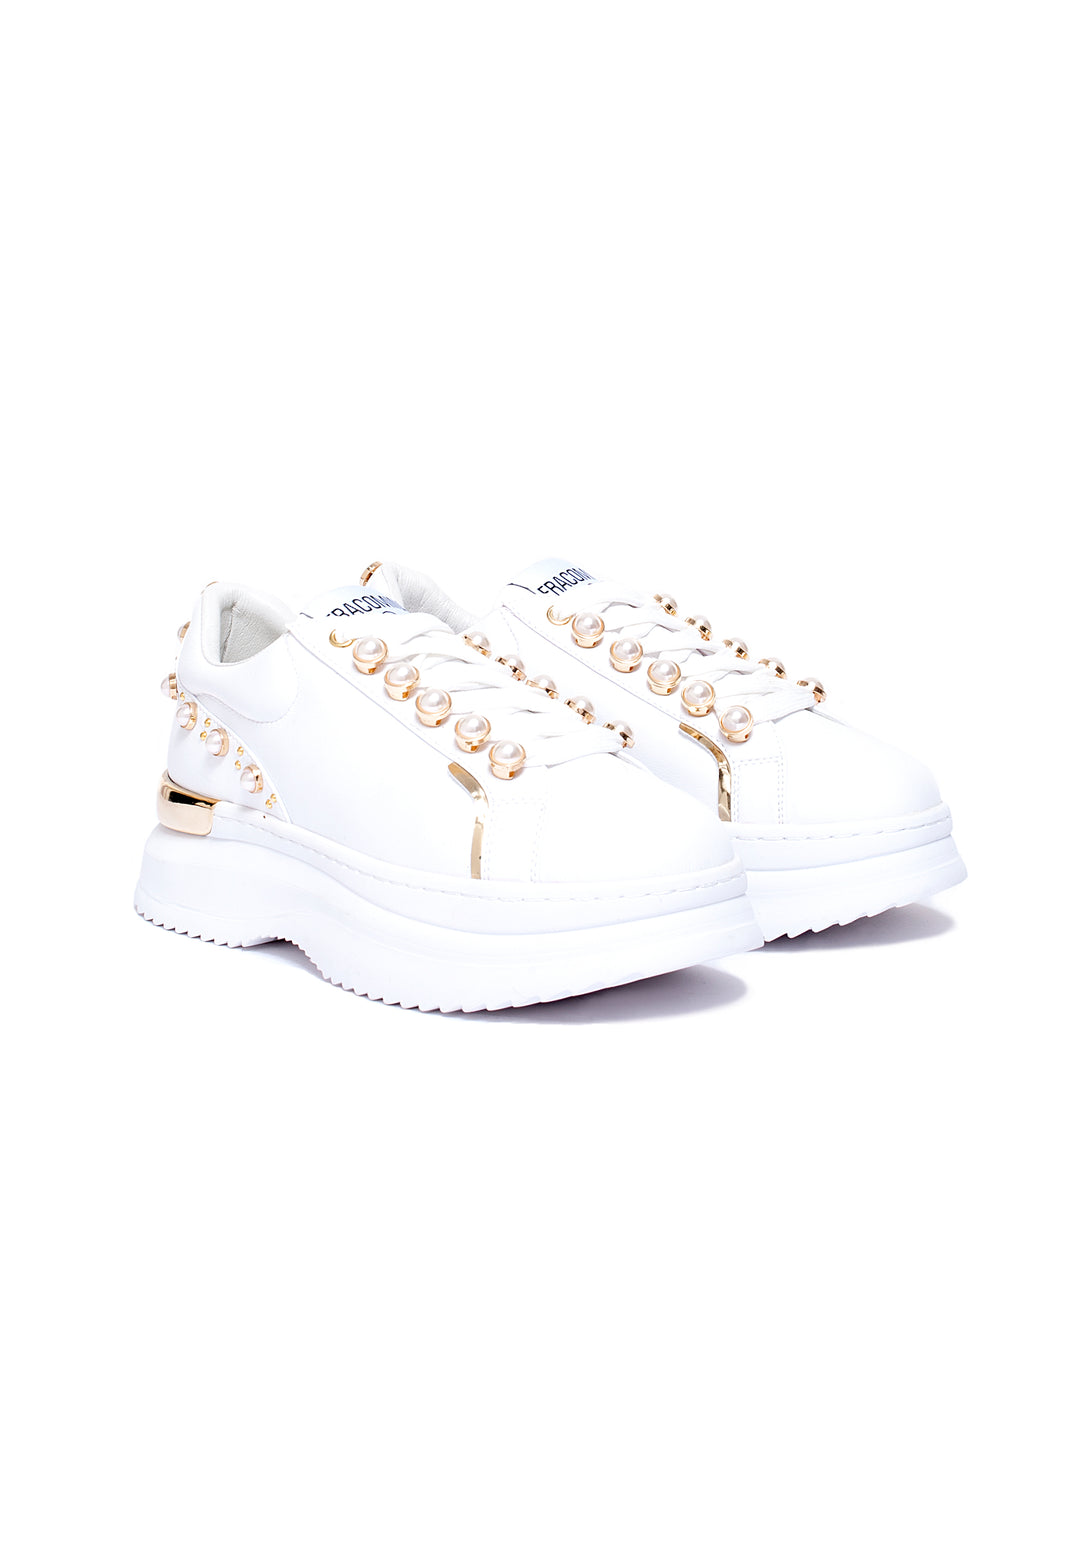 Sneakers made in eco leather with pearls